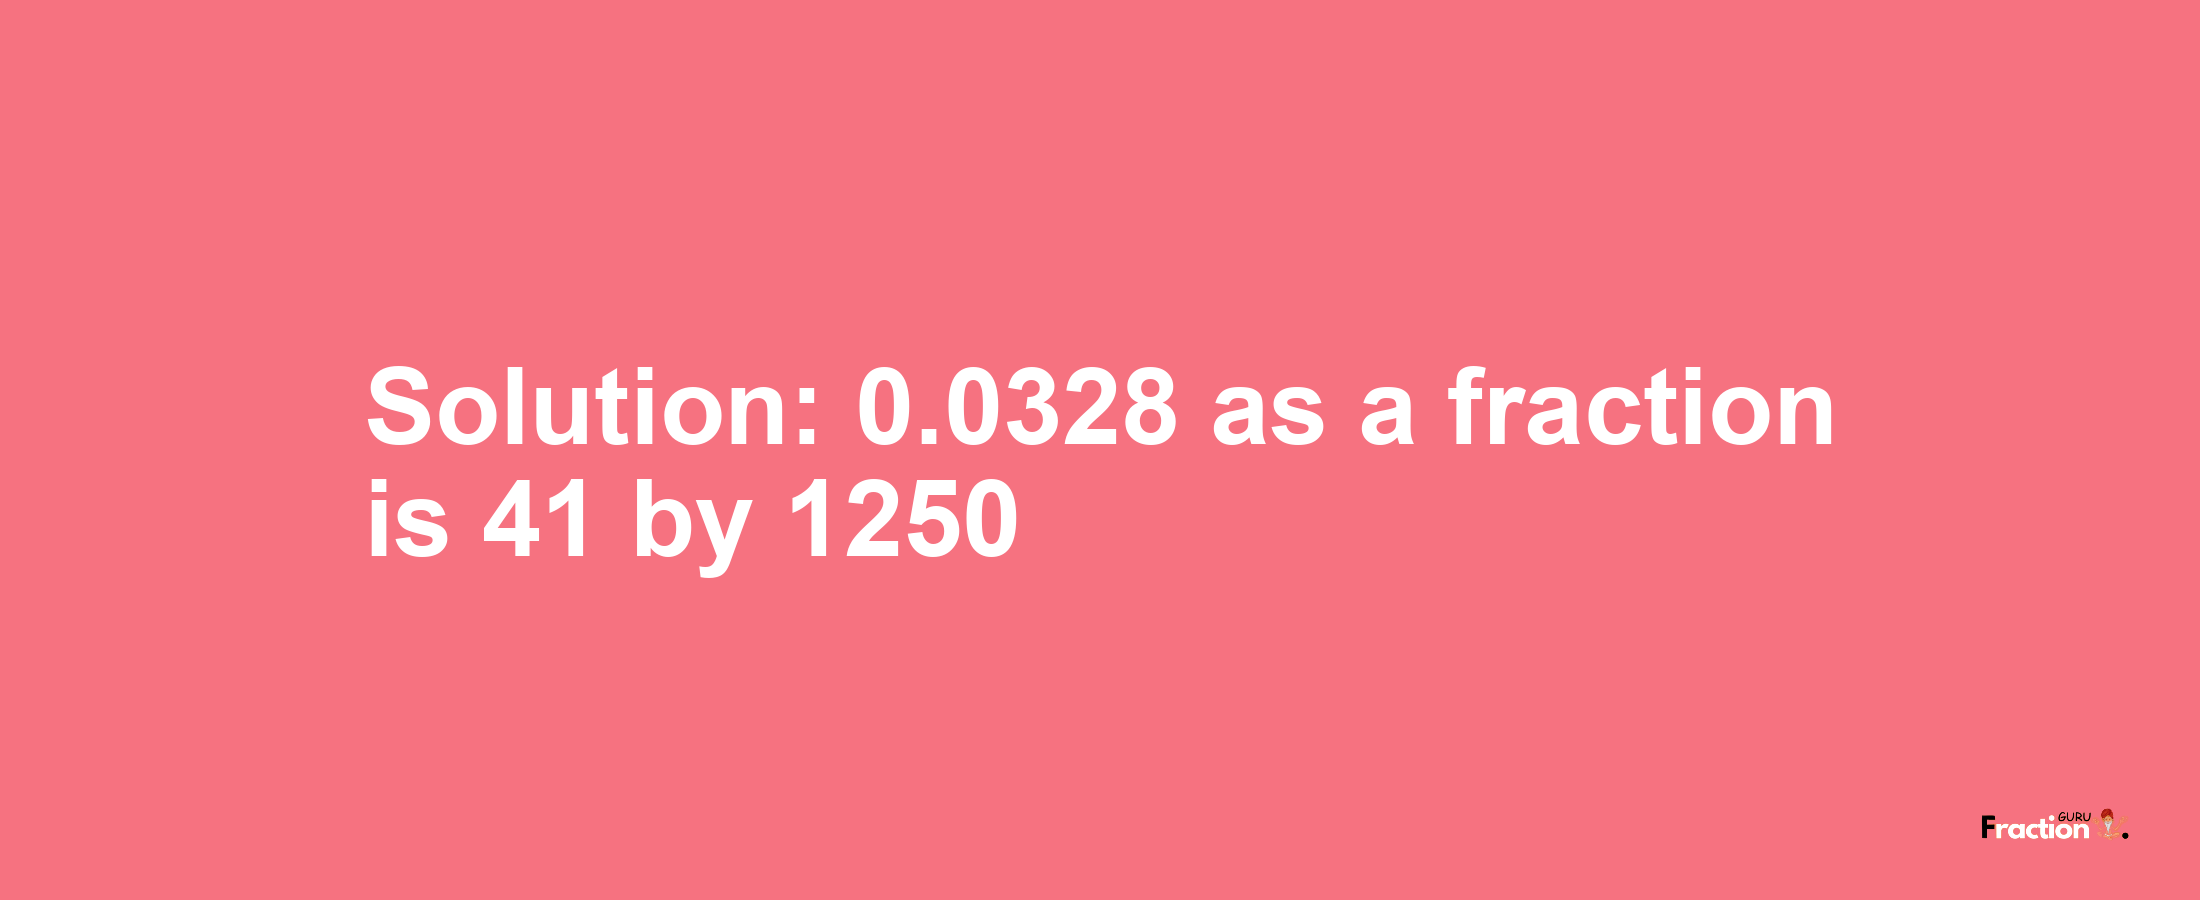 Solution:0.0328 as a fraction is 41/1250